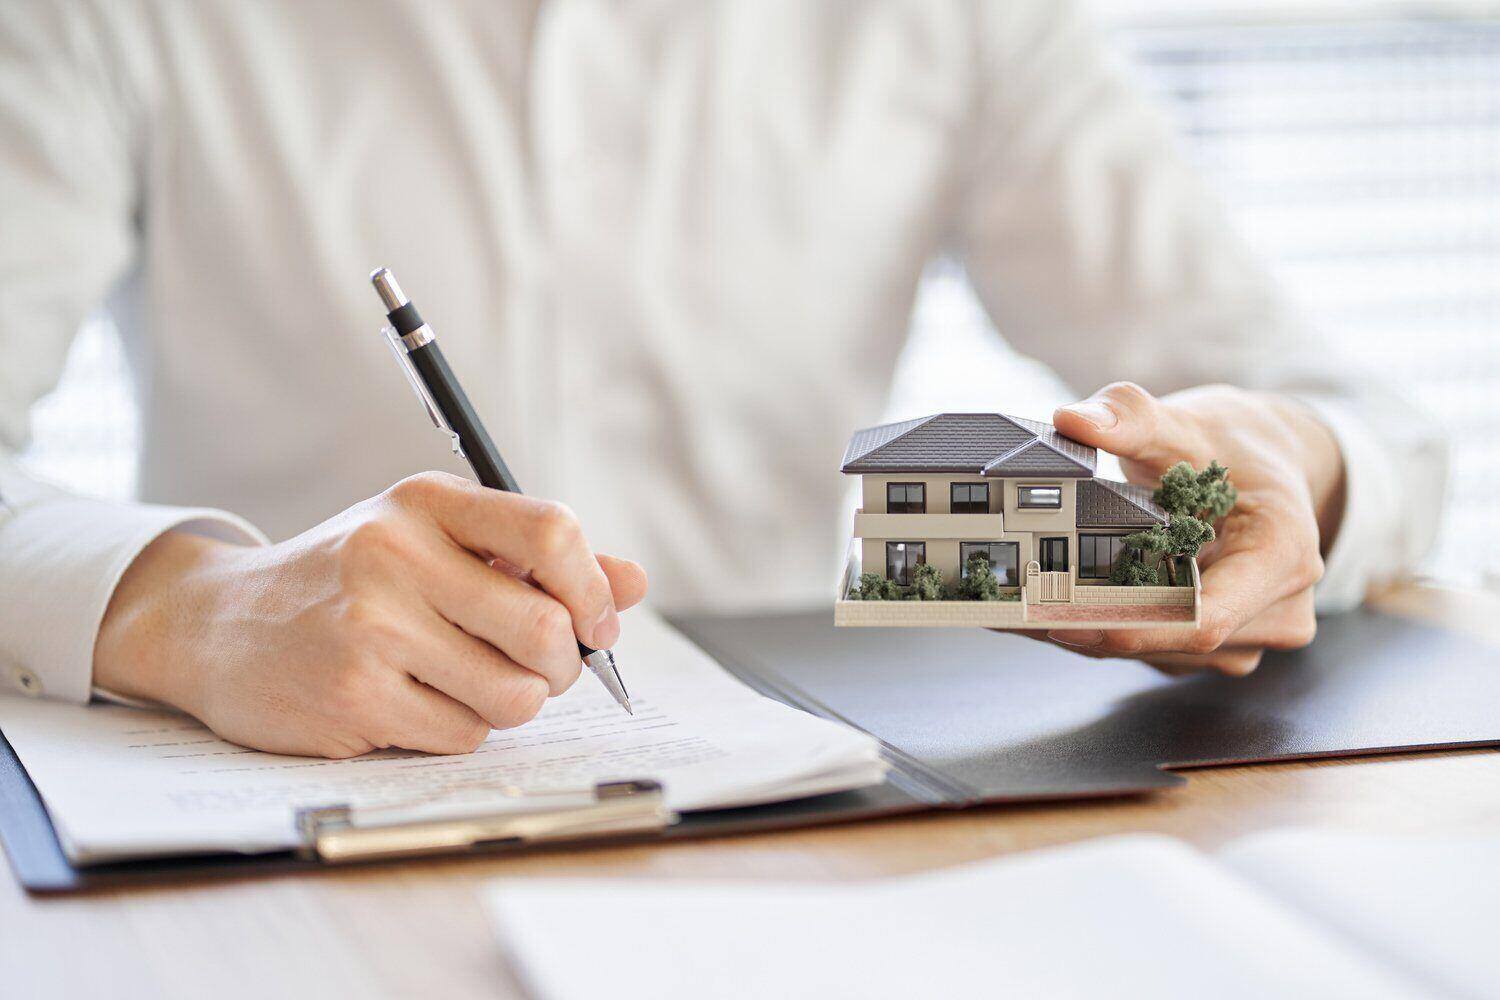 Man holding a pen and small model home while choosing the best home warranty for his house